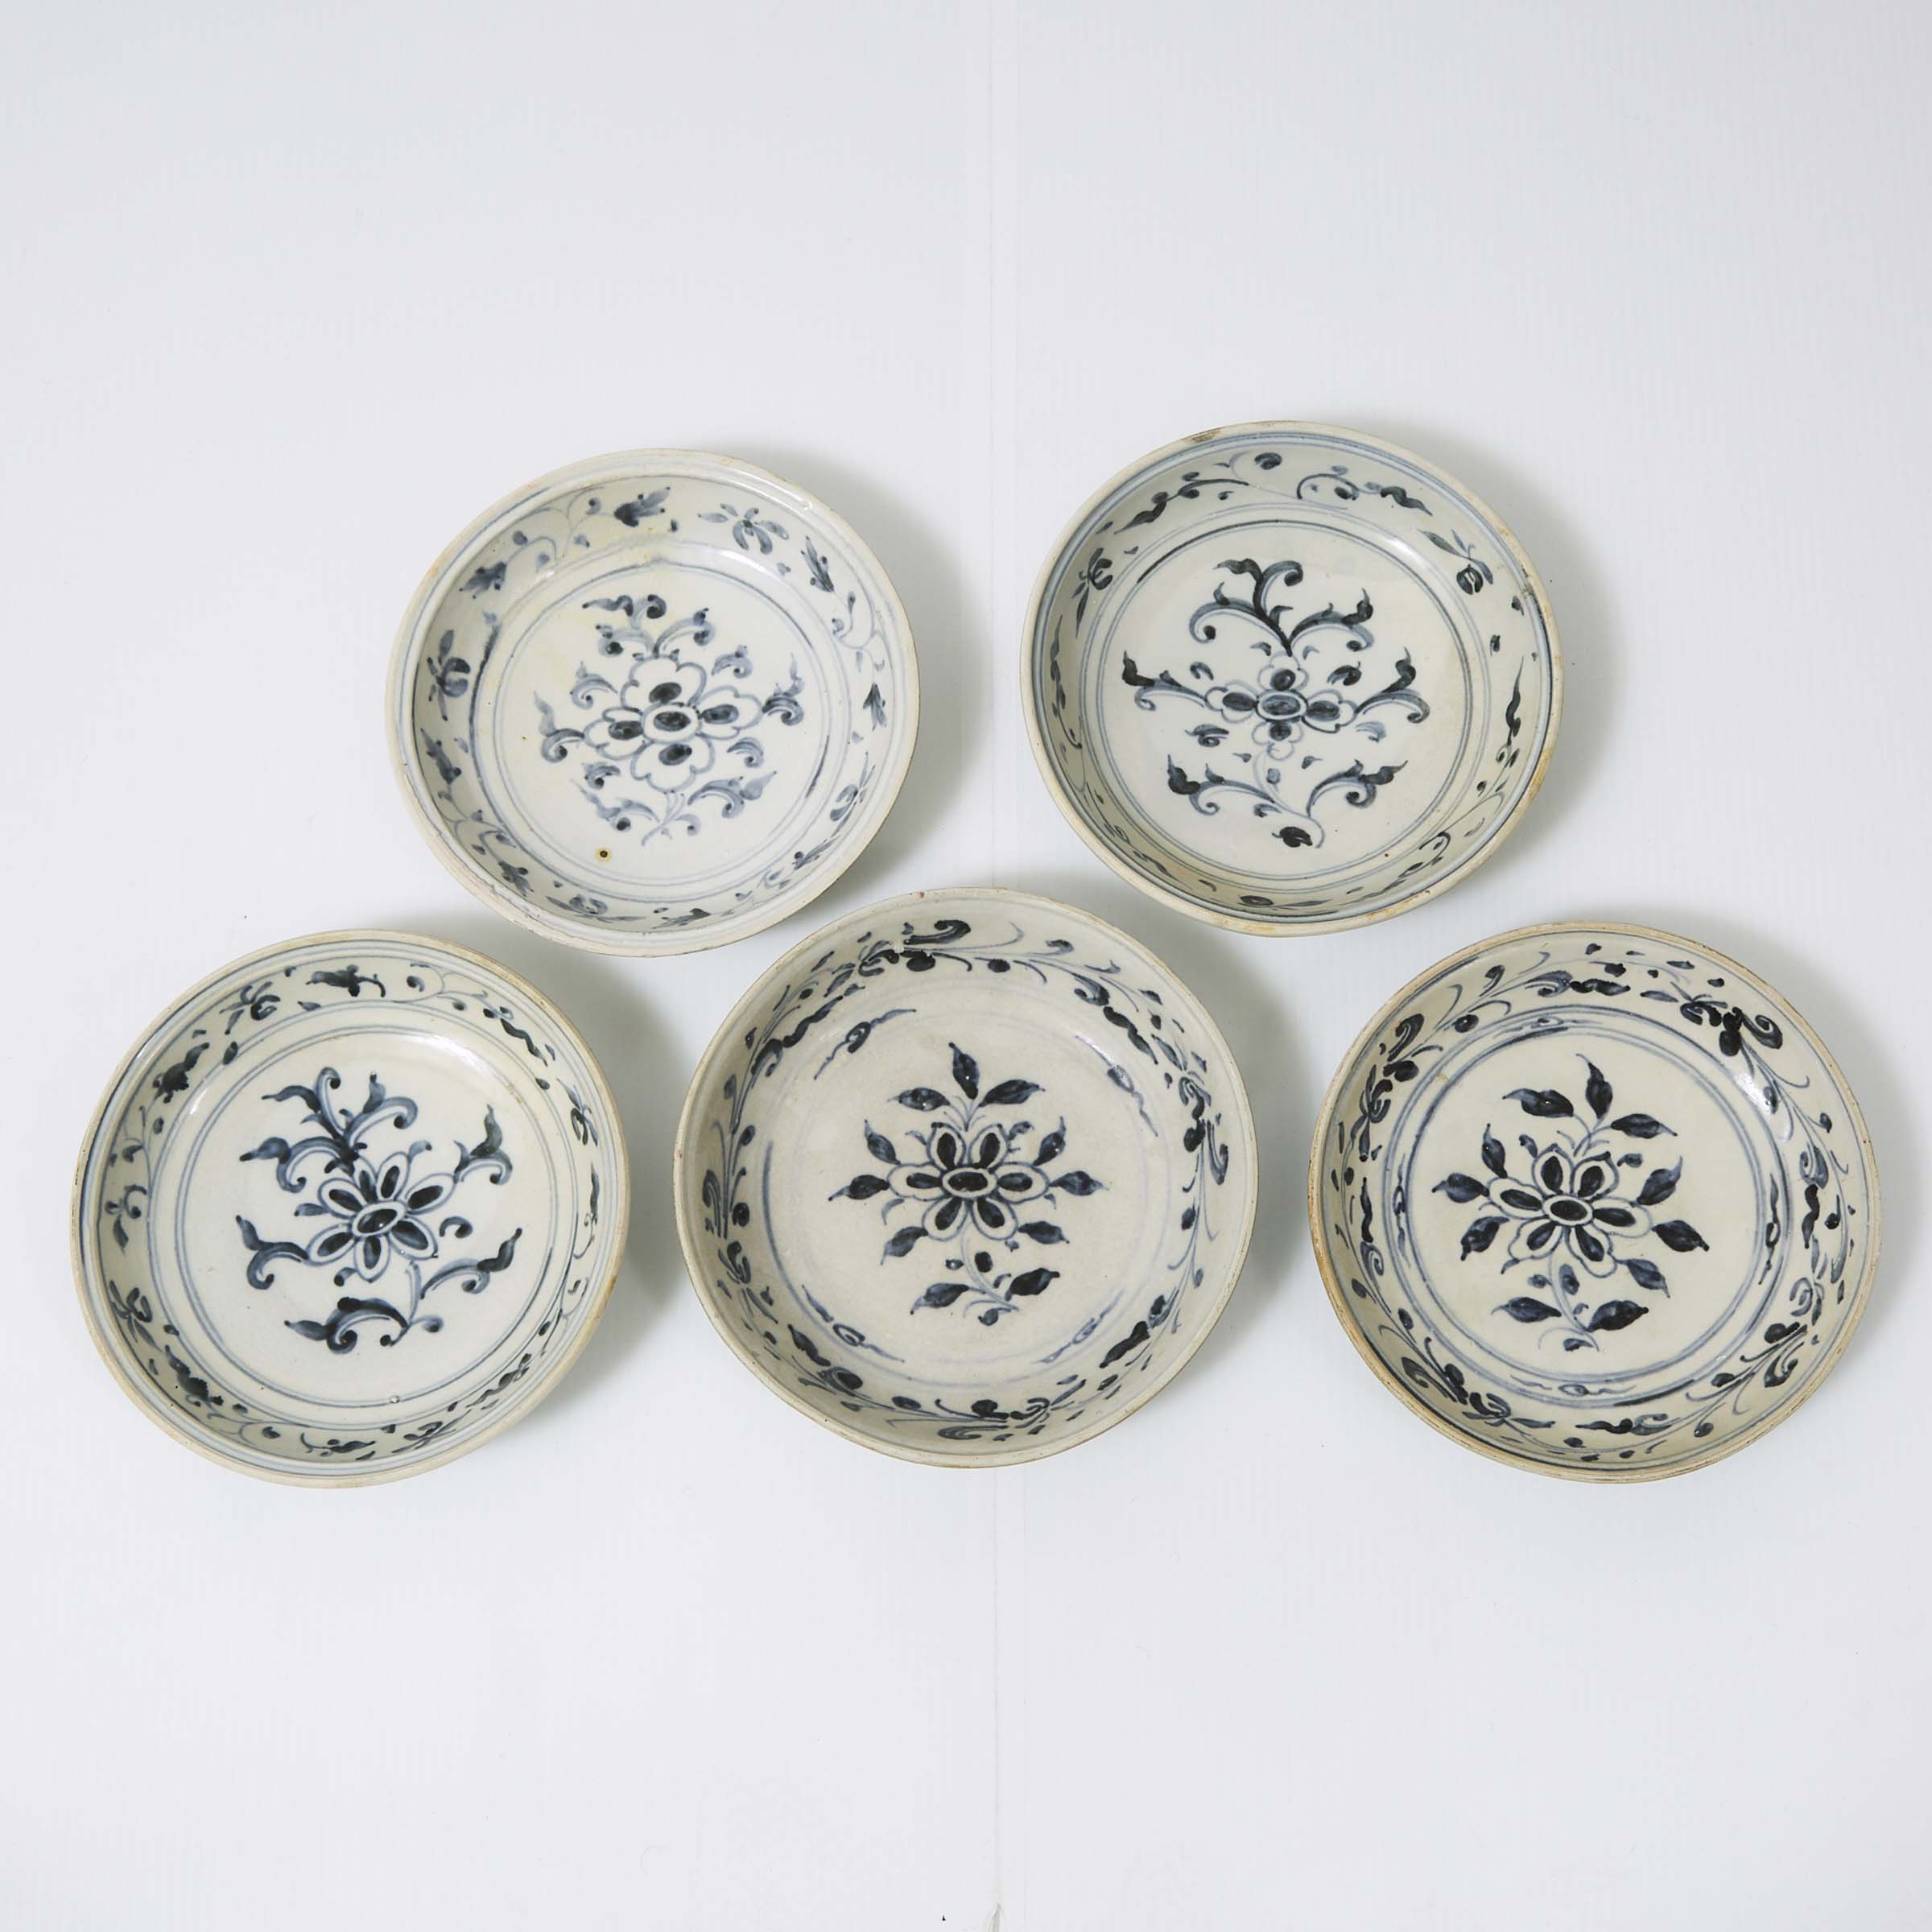 A Set of Five 'Hoi An Hoard' Vietnamese Blue and White Circular Dishes, 15th Century